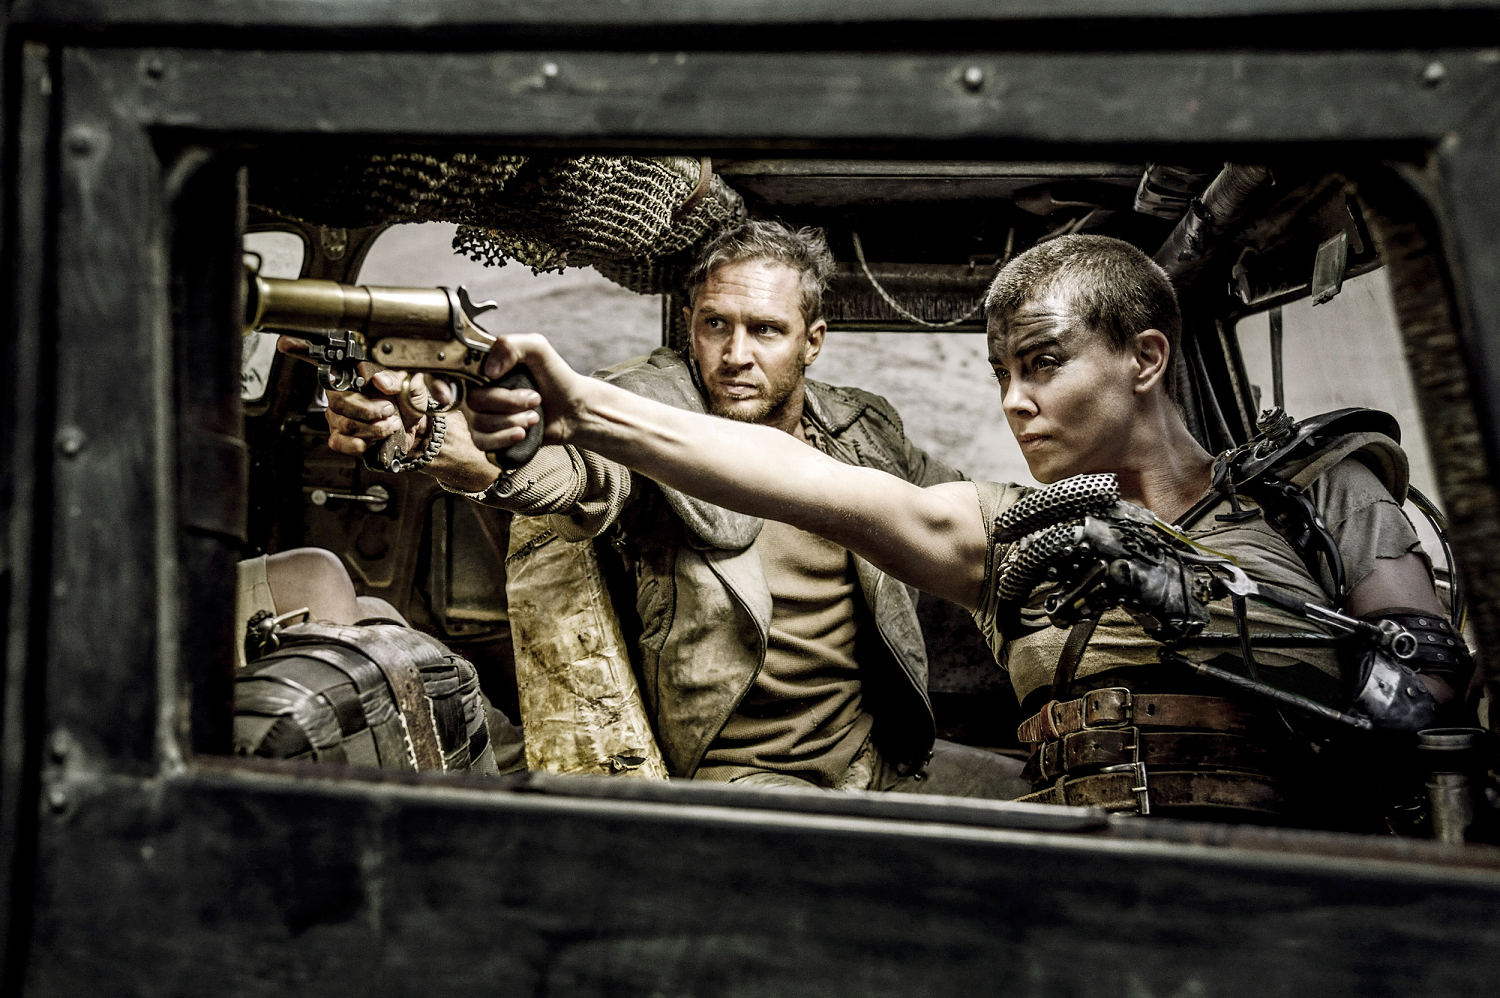 ‘Mad Max’ director considered de-aging Charlize Theron for ‘Furiosa,’ but the technology was ‘never persuasive’